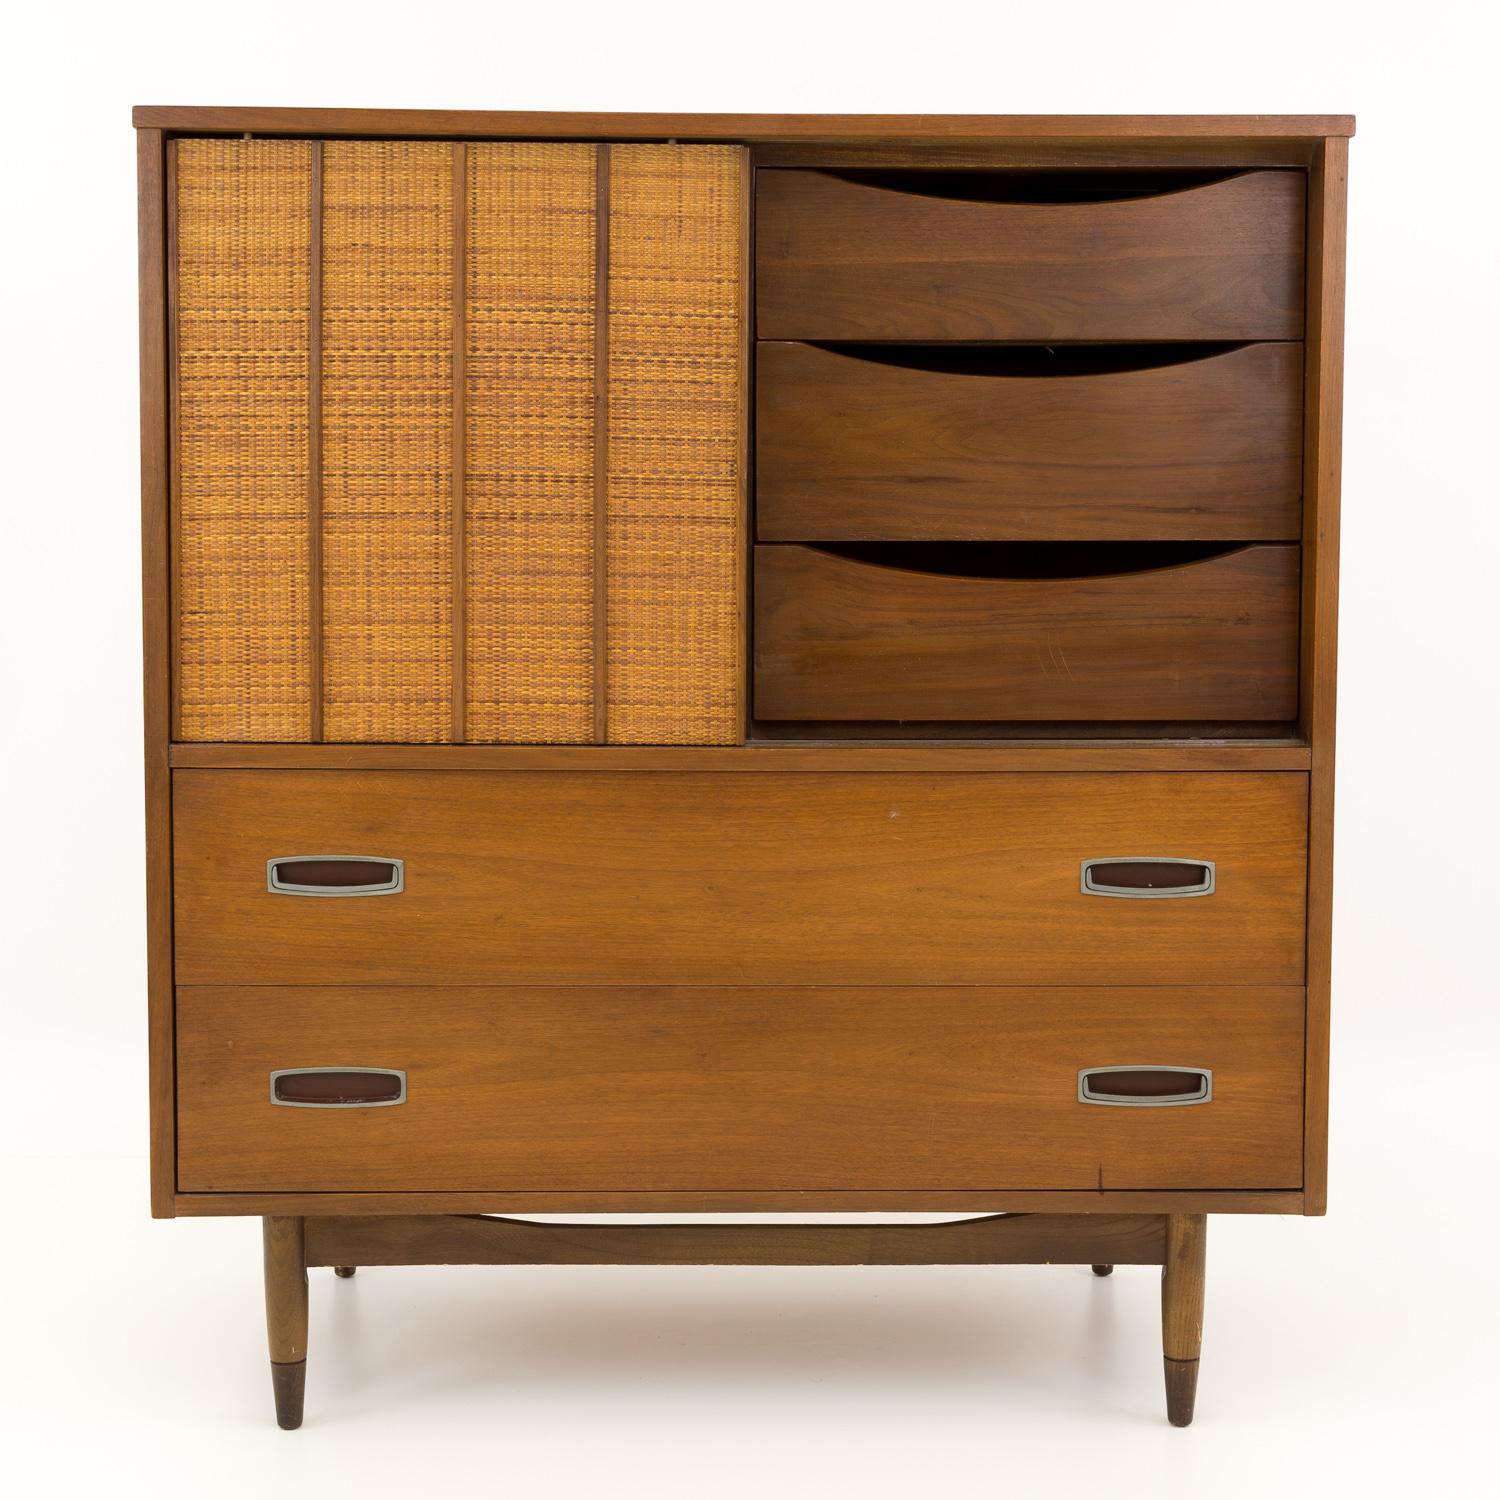 Mainline by Hooker mid century caned highboy dresser chest

Highboy measures: 42 wide x 20 deep x 46.75 inches high

?All pieces of furniture can be had in what we call restored vintage condition. That means the piece is restored upon purchase